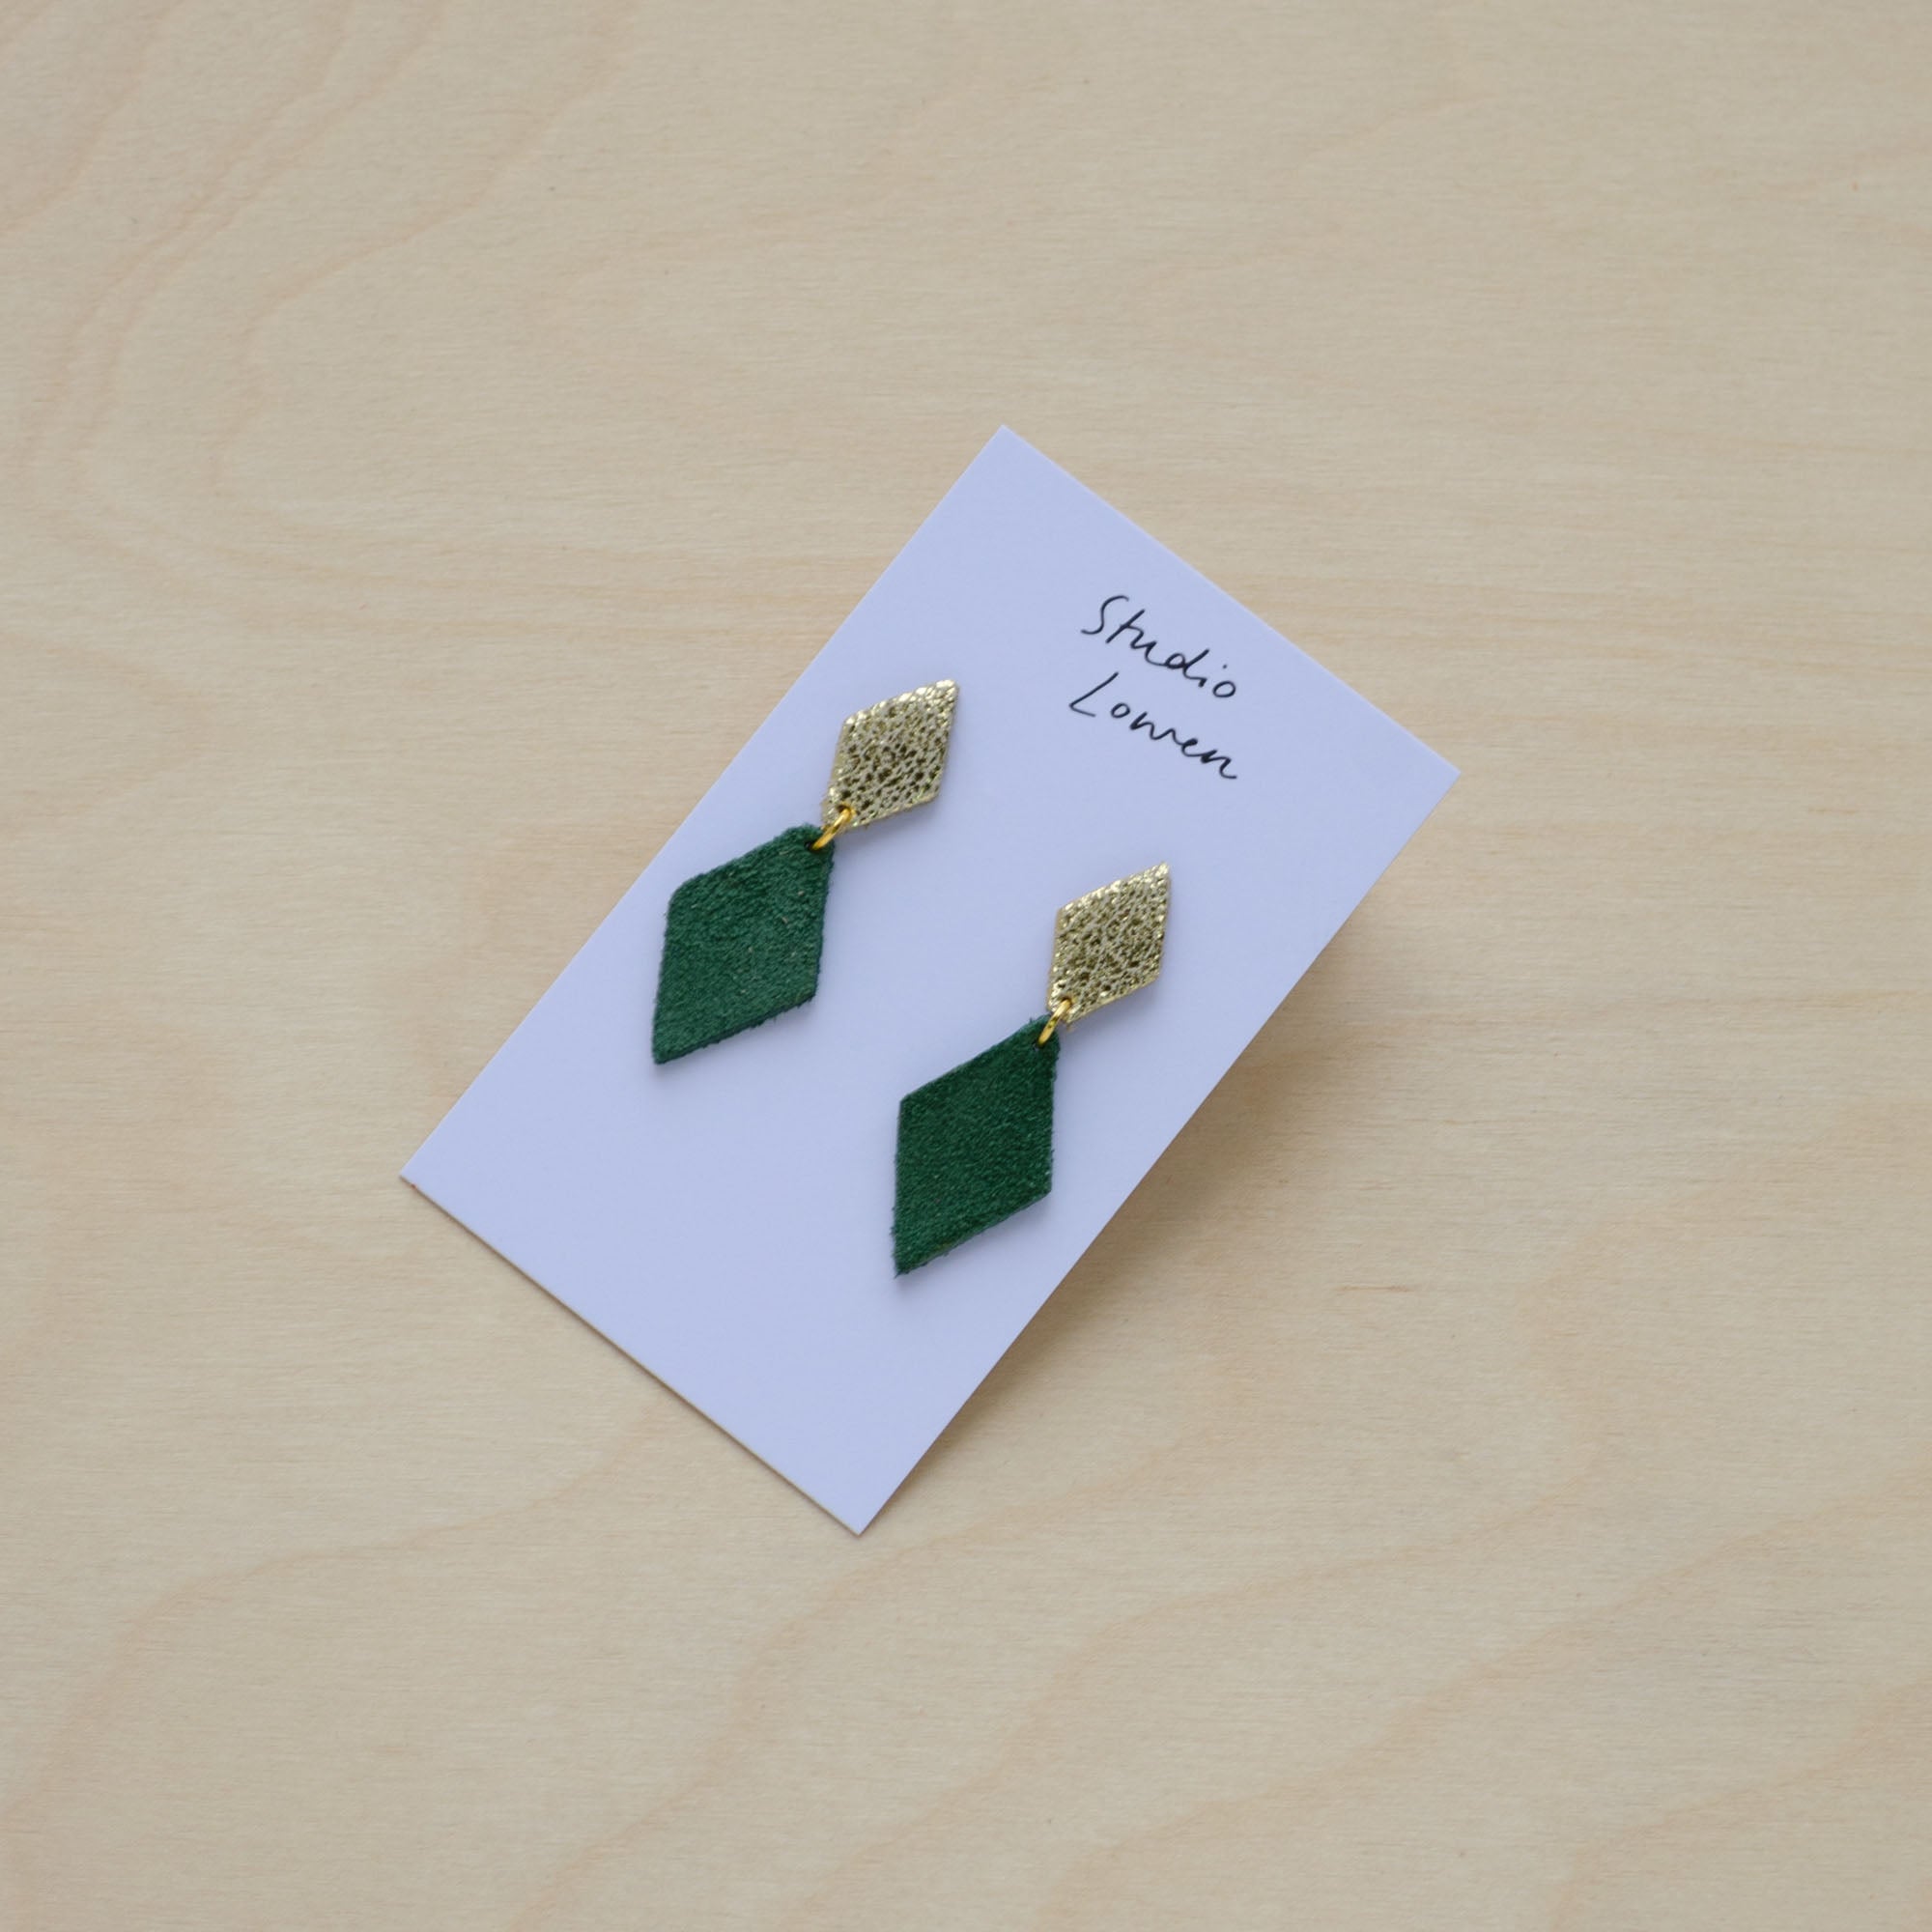 Alba Earrings in Moss Green and Shimmer Gold